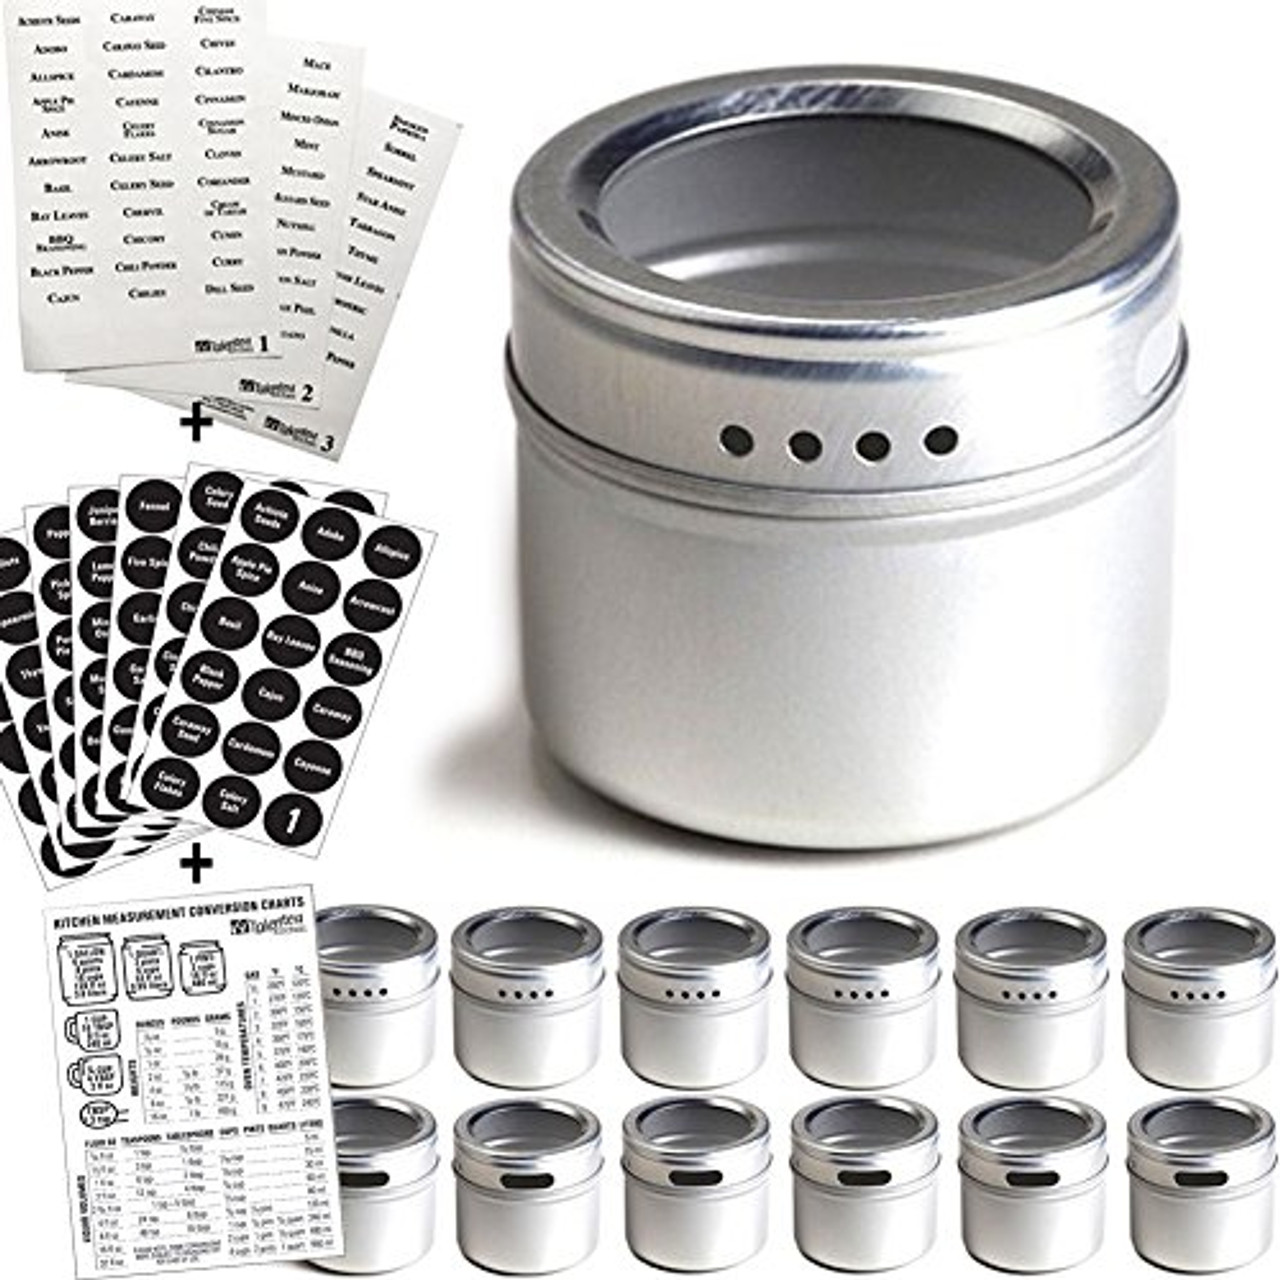 12 Magnetic Spice Tins and 2 Types of Spice Labels. 12 Storage